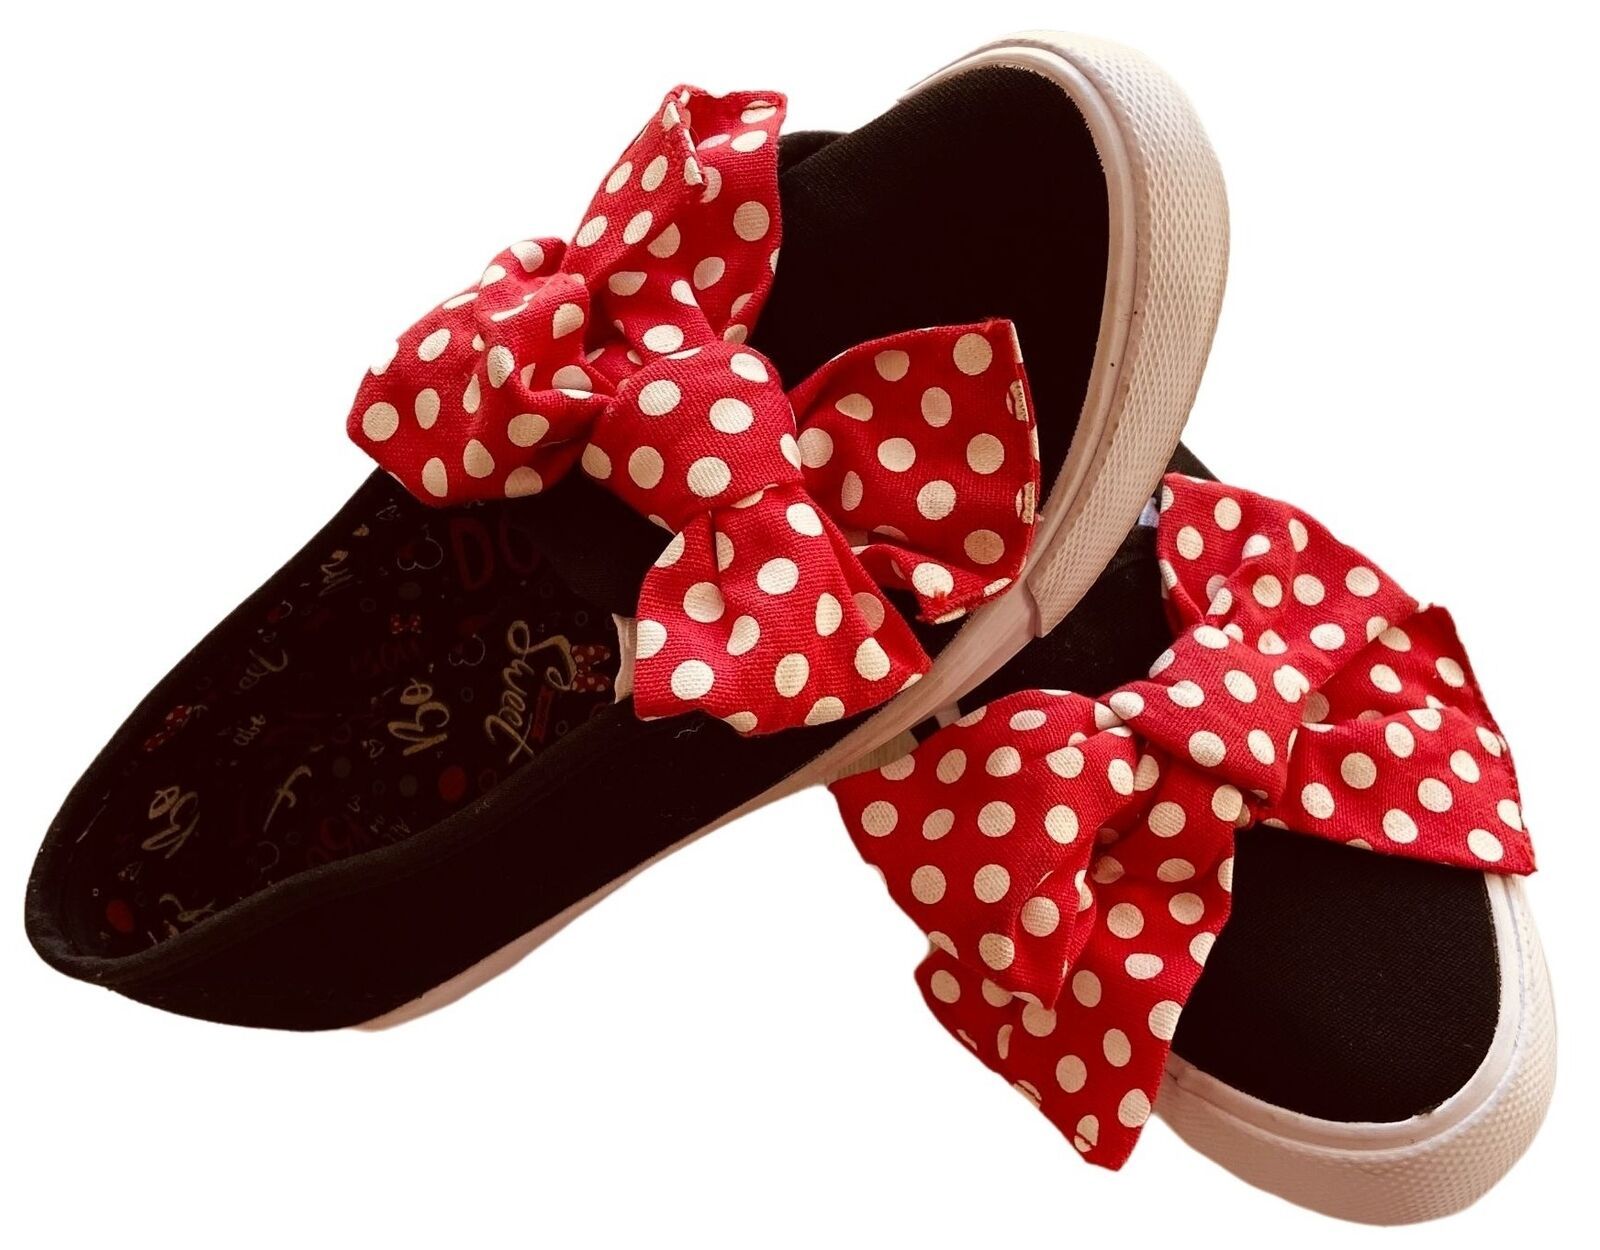 Disney Vans Style Minnie Mouse Bows Black - Red & White Size Girls 5 - $14.65